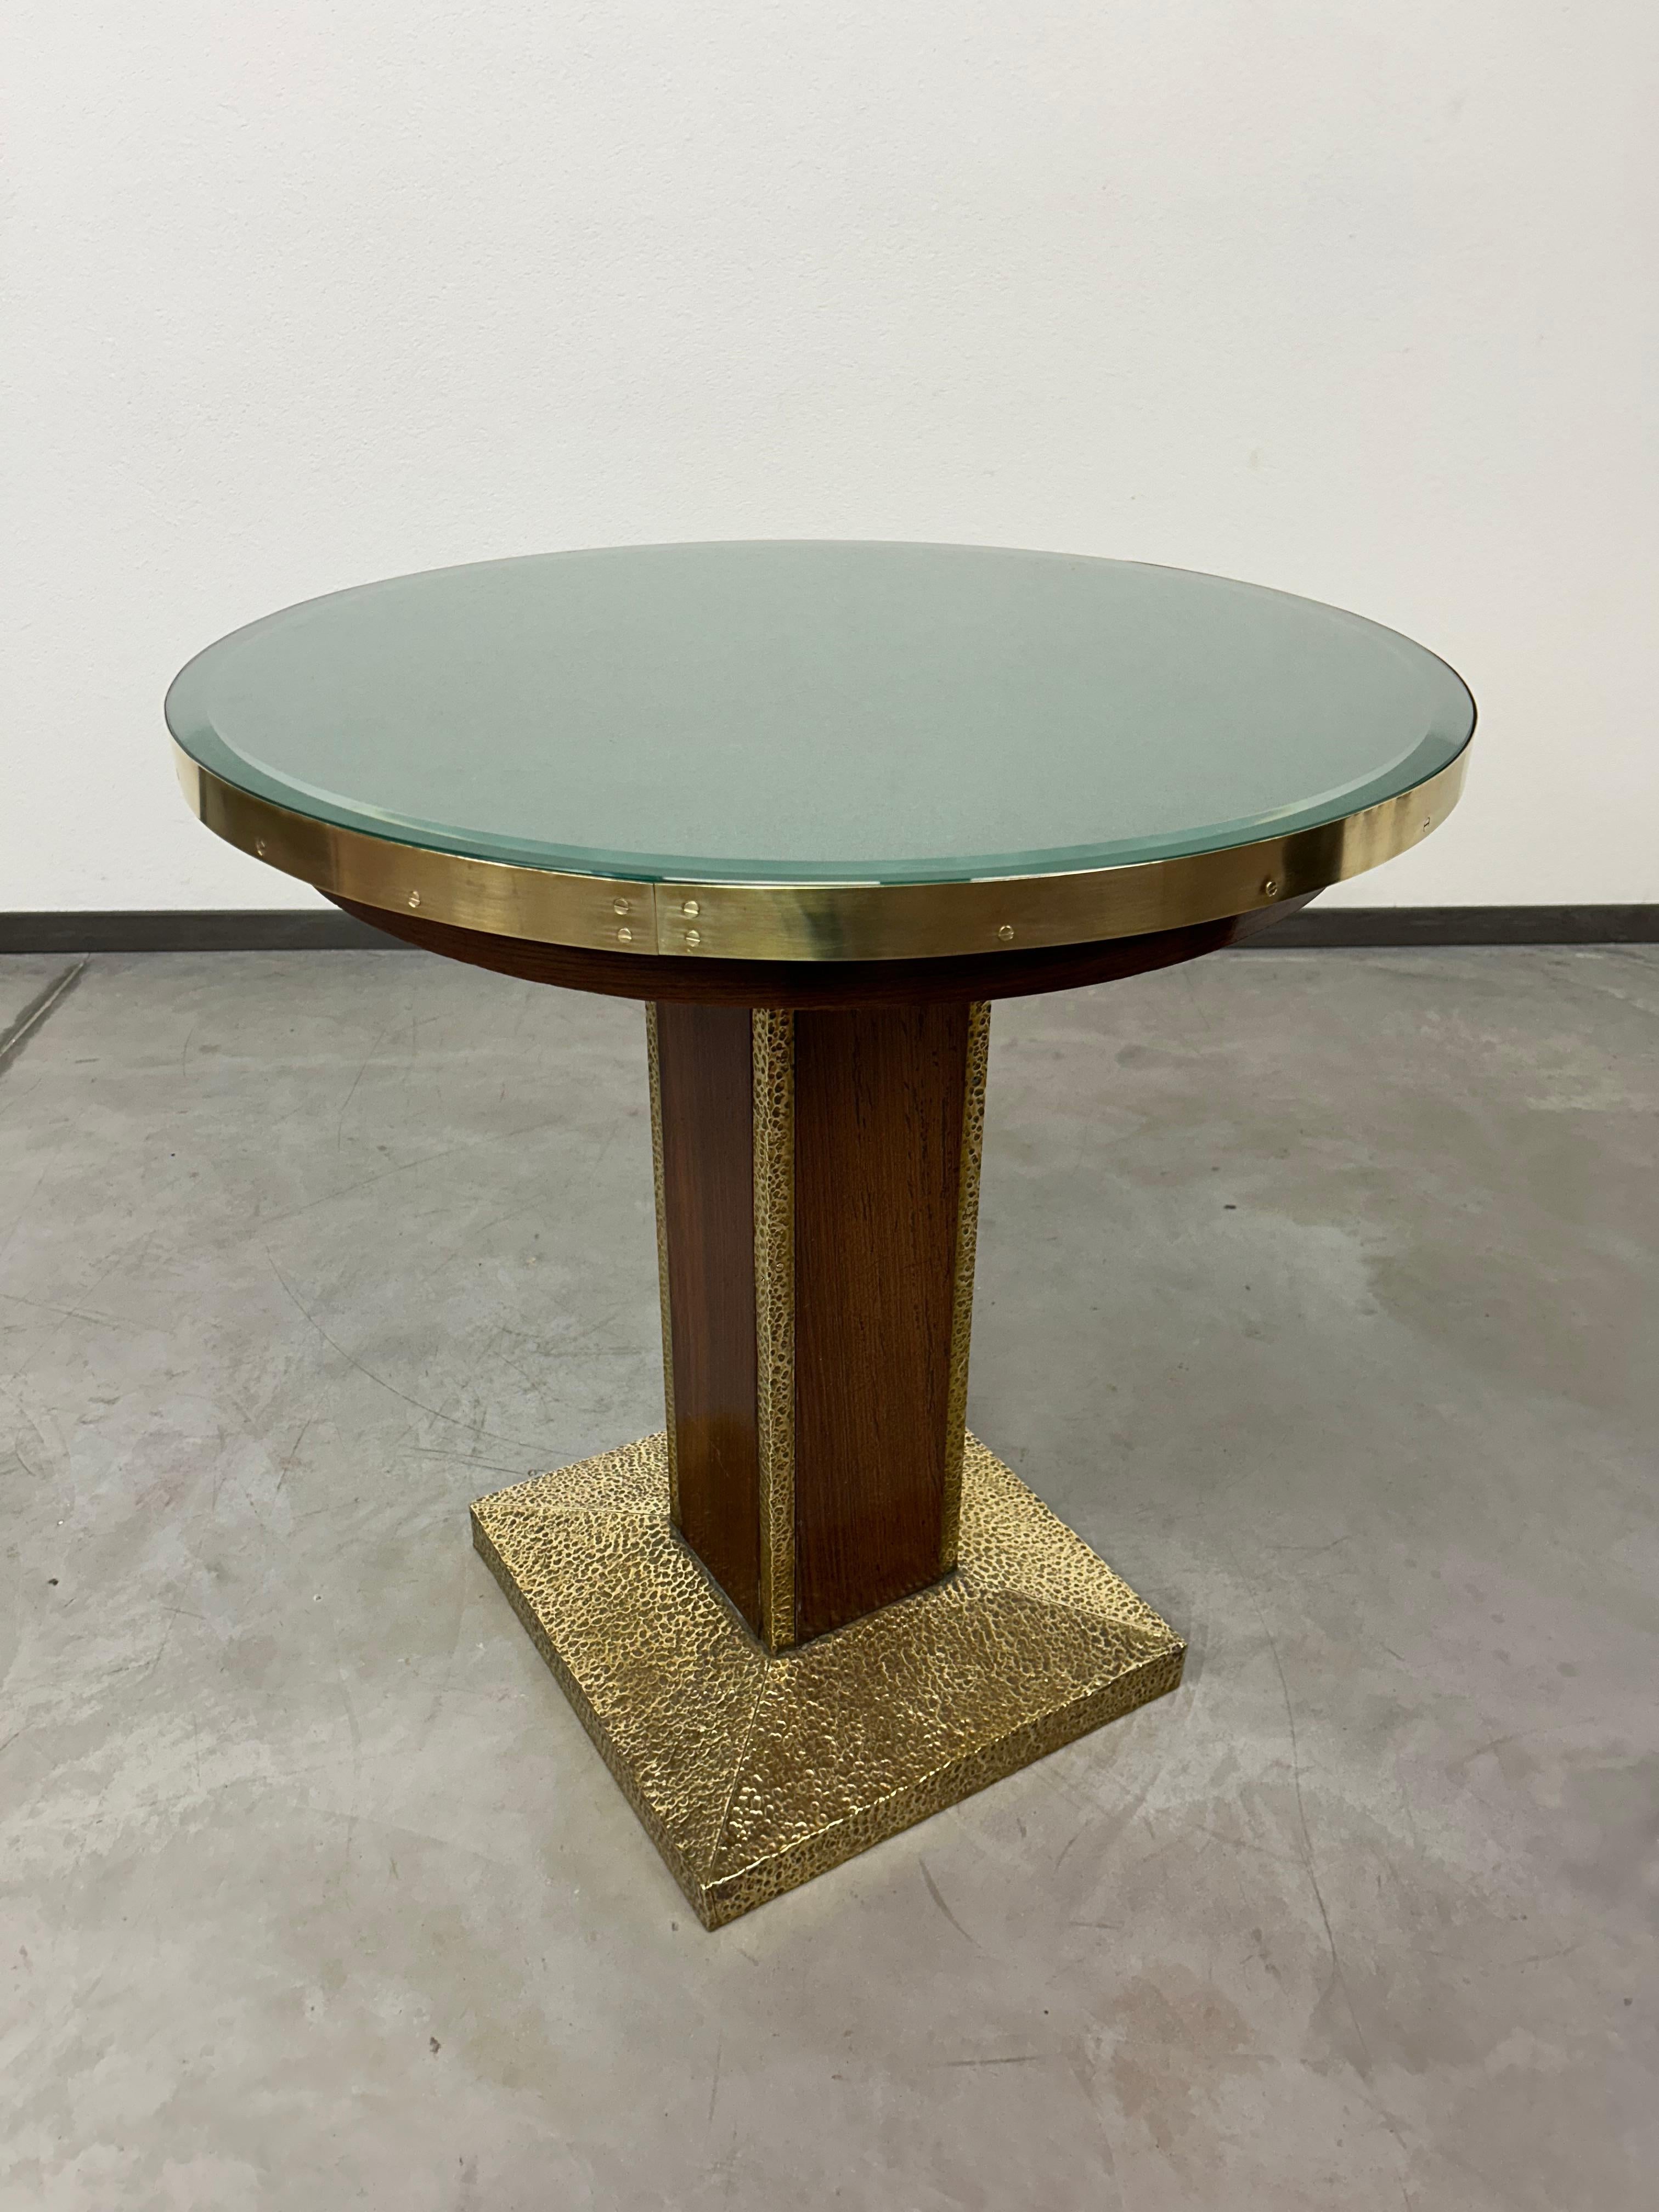 Jugendstil coffee table with brass edging with hammered decor. Professionally stained and repolished.